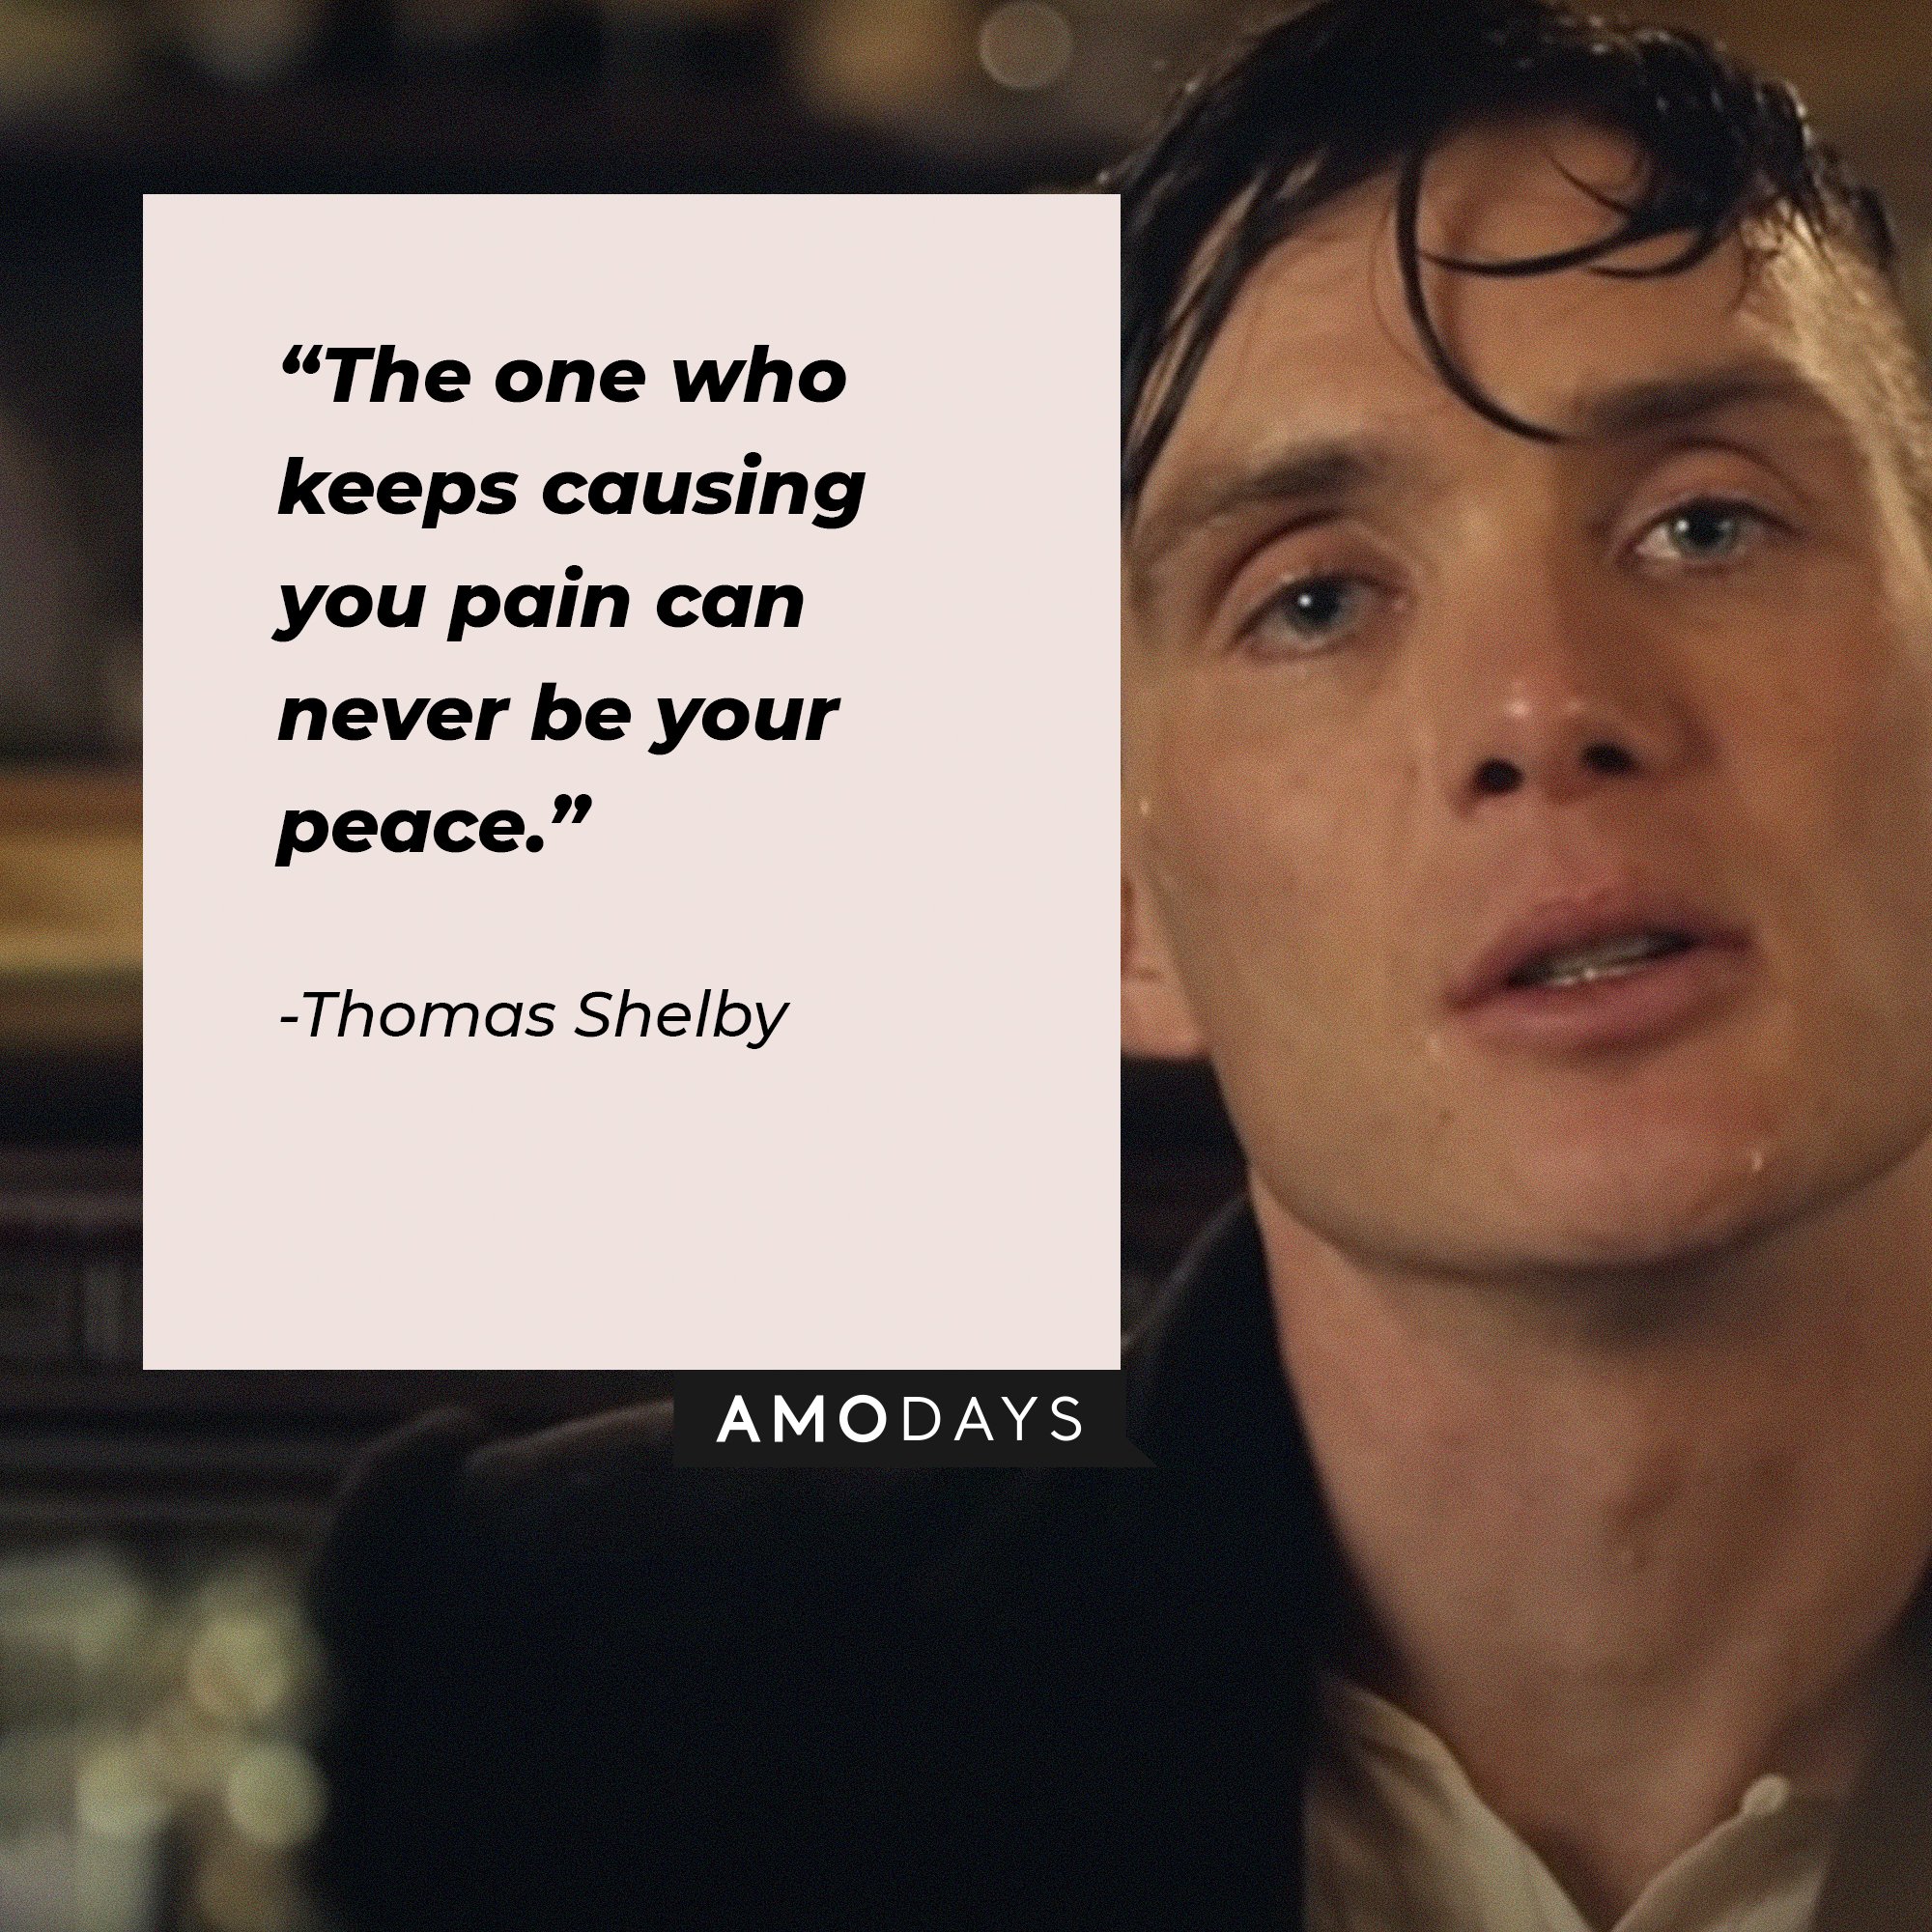 Thomas Shelby's quote: “The one who keeps causing you pain can never be your peace.”  | Image: AmoDays